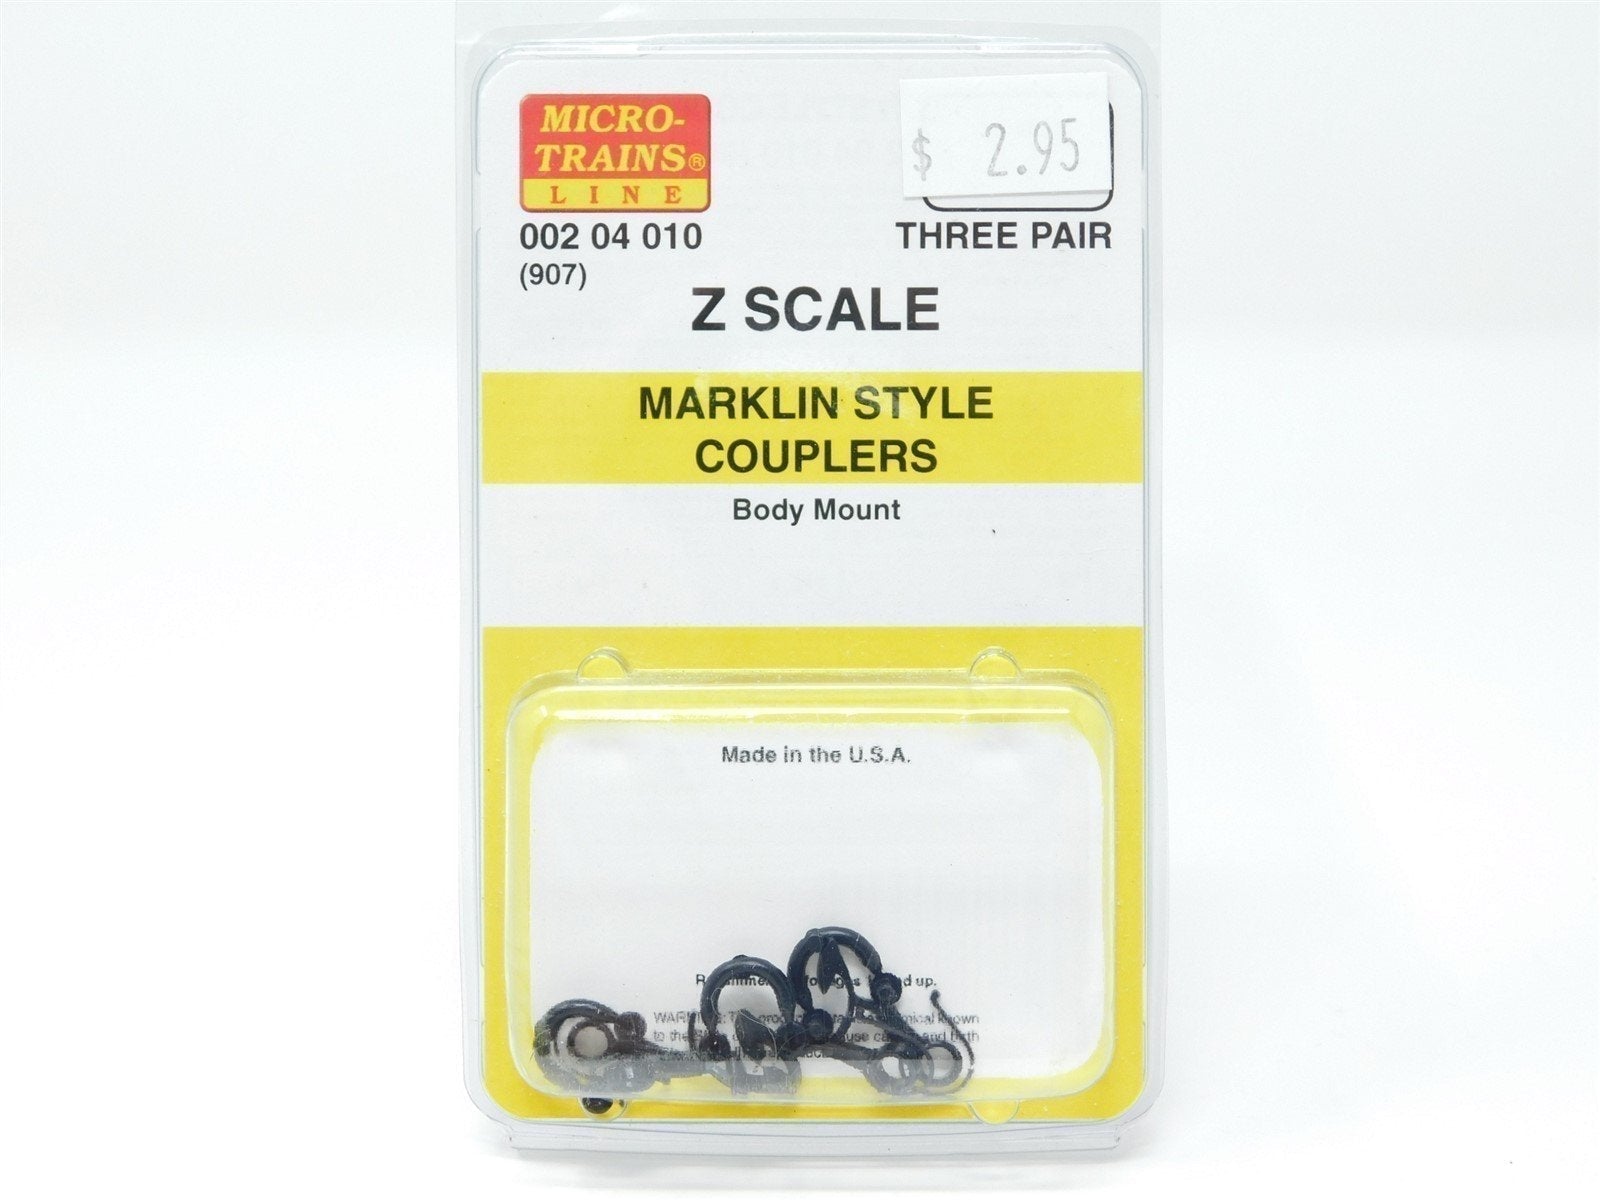 Z Scale Micro-Trains MTL 00204010 (907) Marklin Style Couplers - 3 PAIR